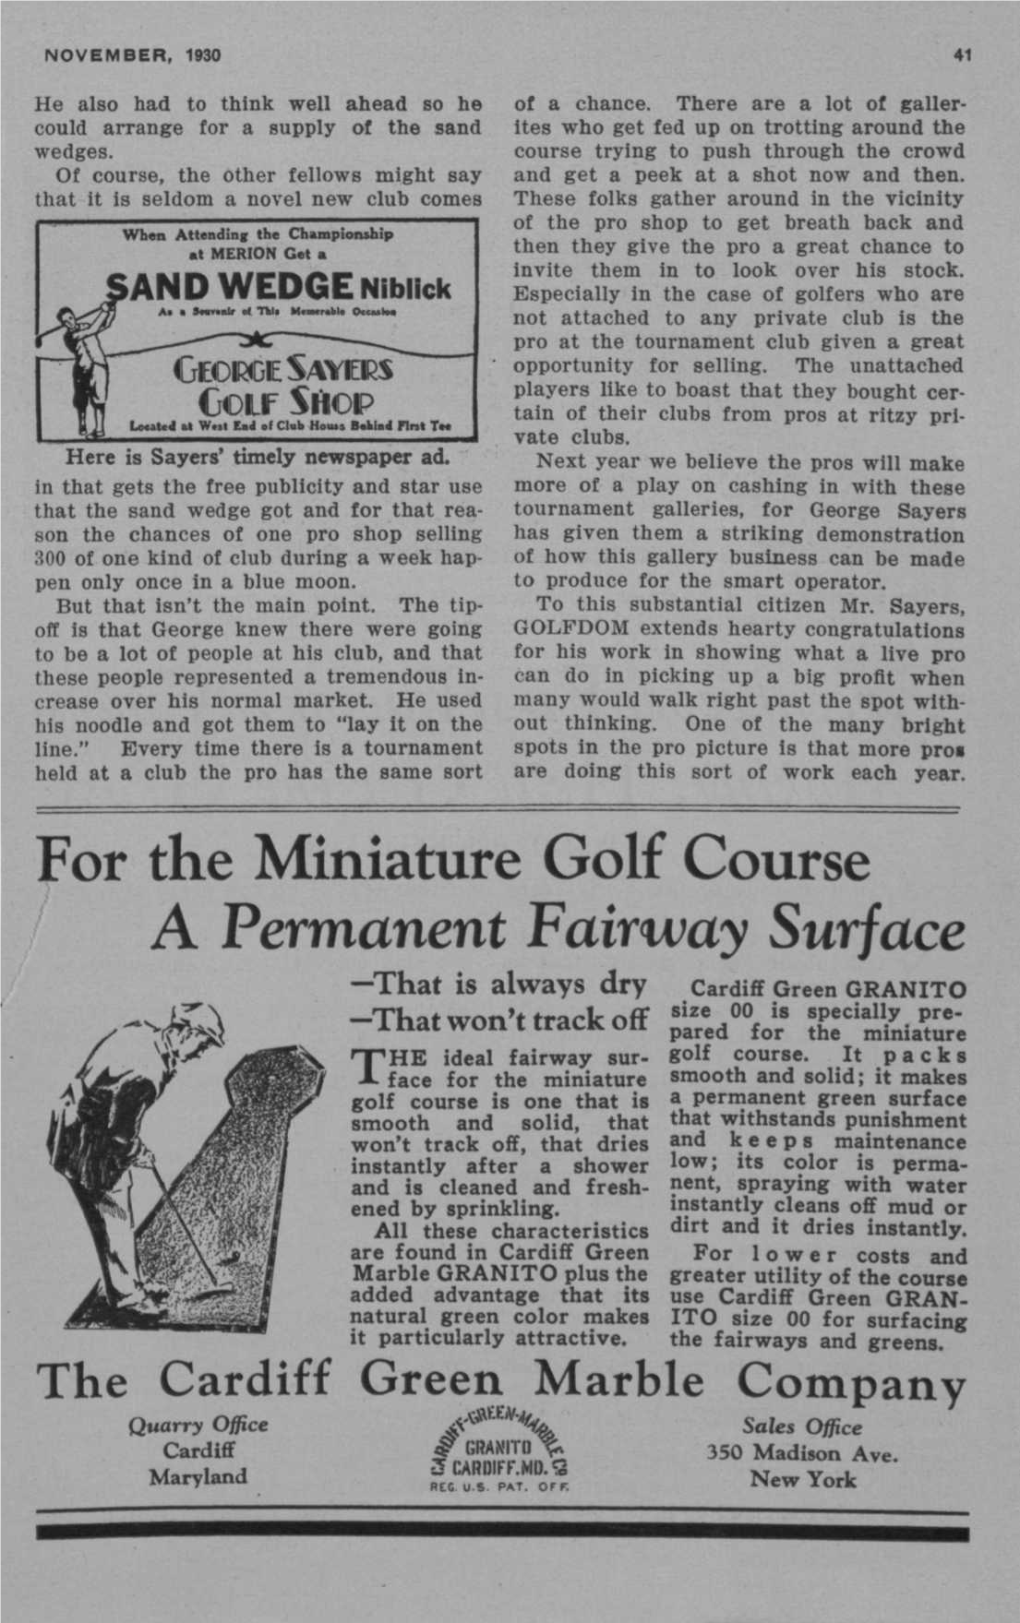 For the Miniature Golf Course a Permanent Fairway Surface